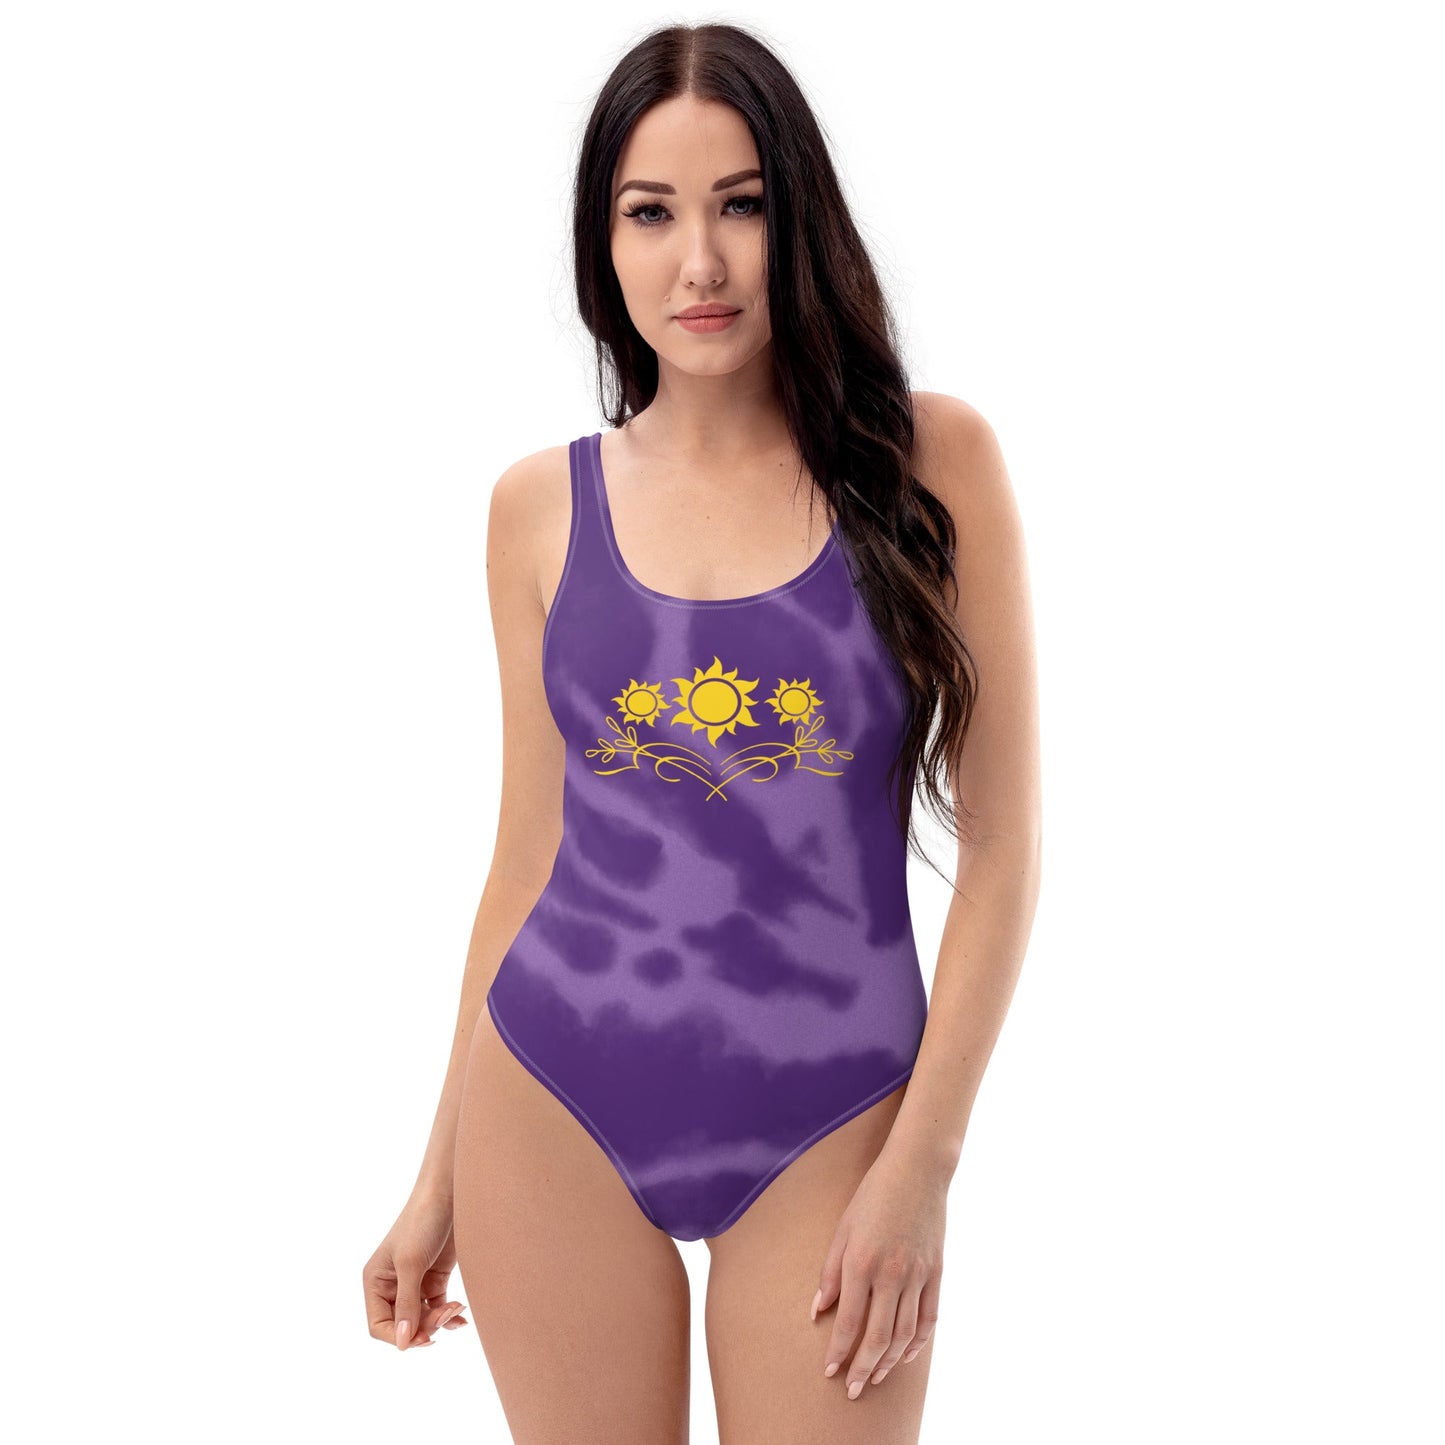 Rapunzel Suns One-Piece Swimsuit adult princesscruise styleWrong Lever Clothing